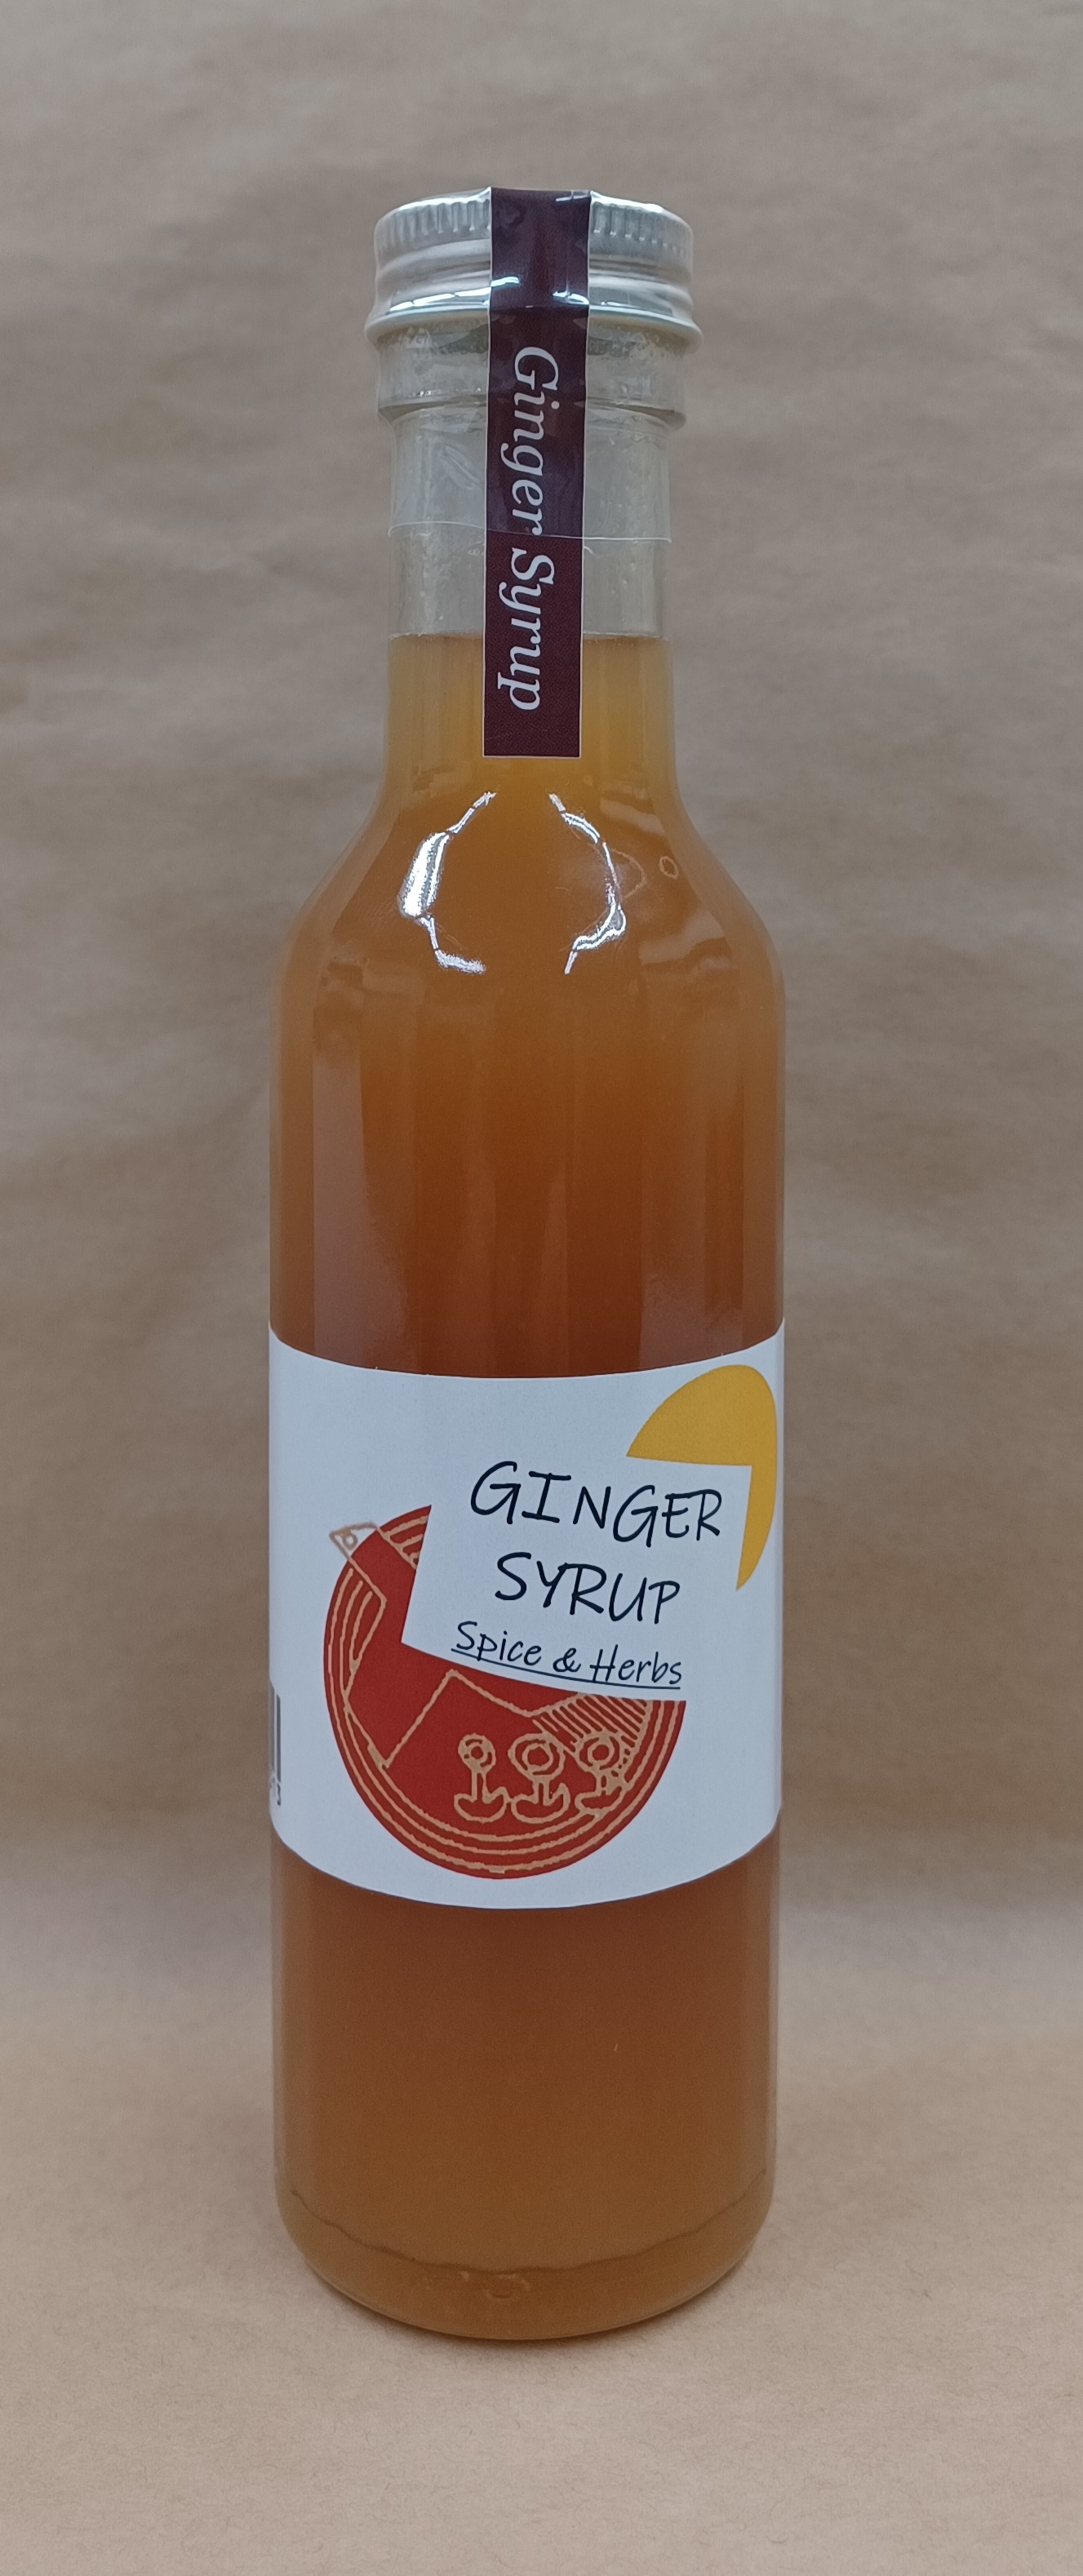 Ginger Syrup spice ＆ herbs